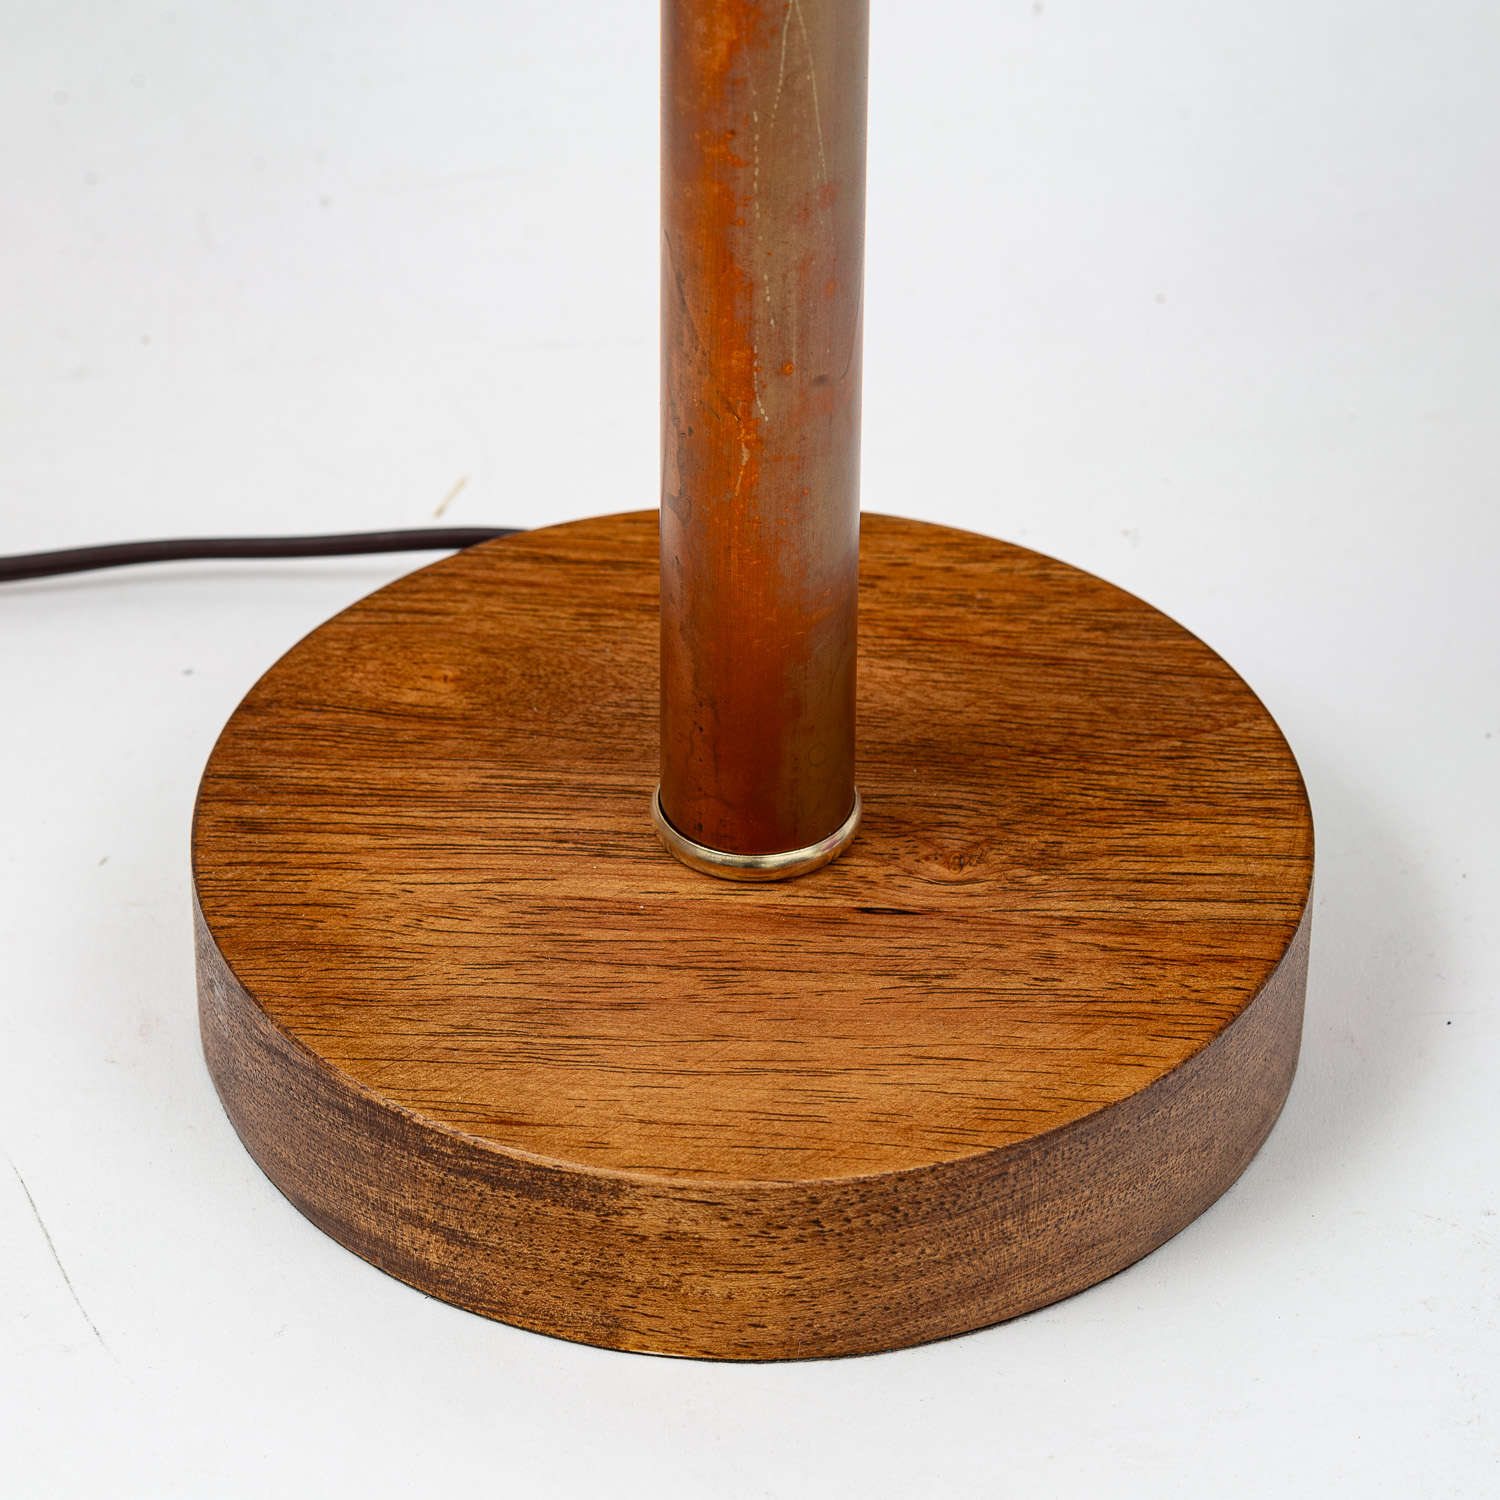 184: Stained oak lamp base 6.5 inches in diameter with antique copper pipe